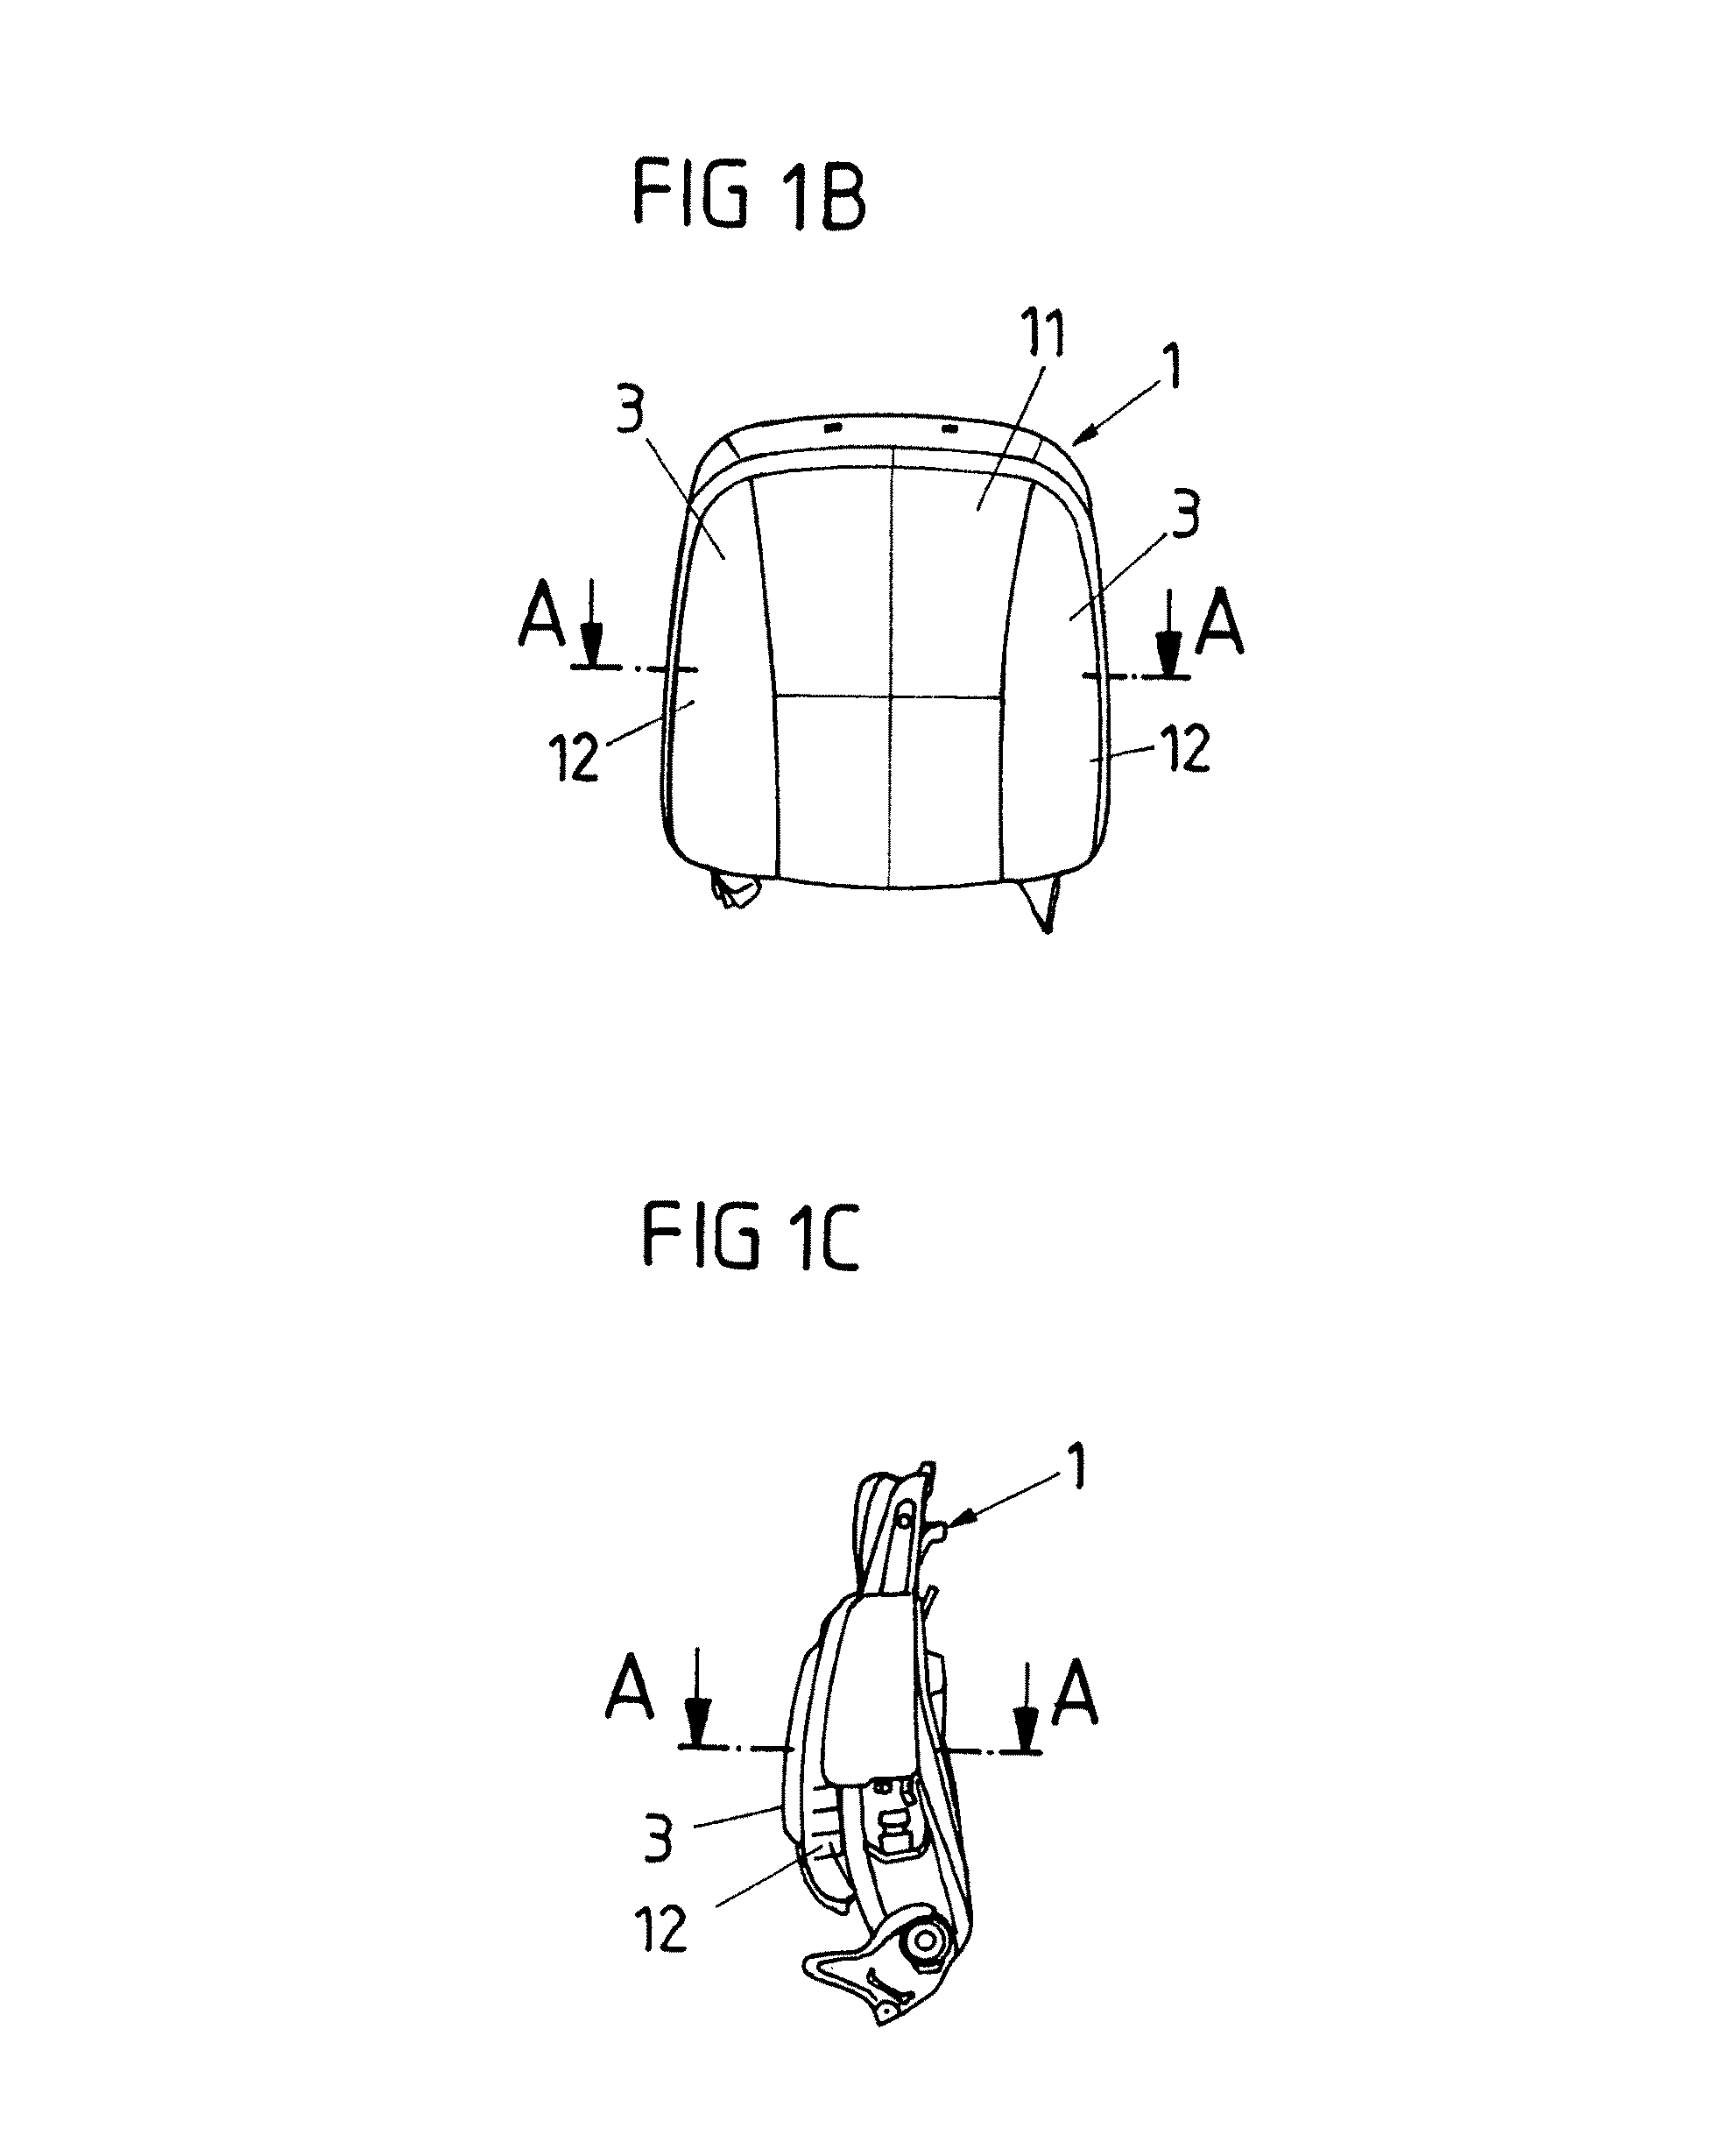 Motor vehicle seat arrangement and method for protecting a vehicle occupant